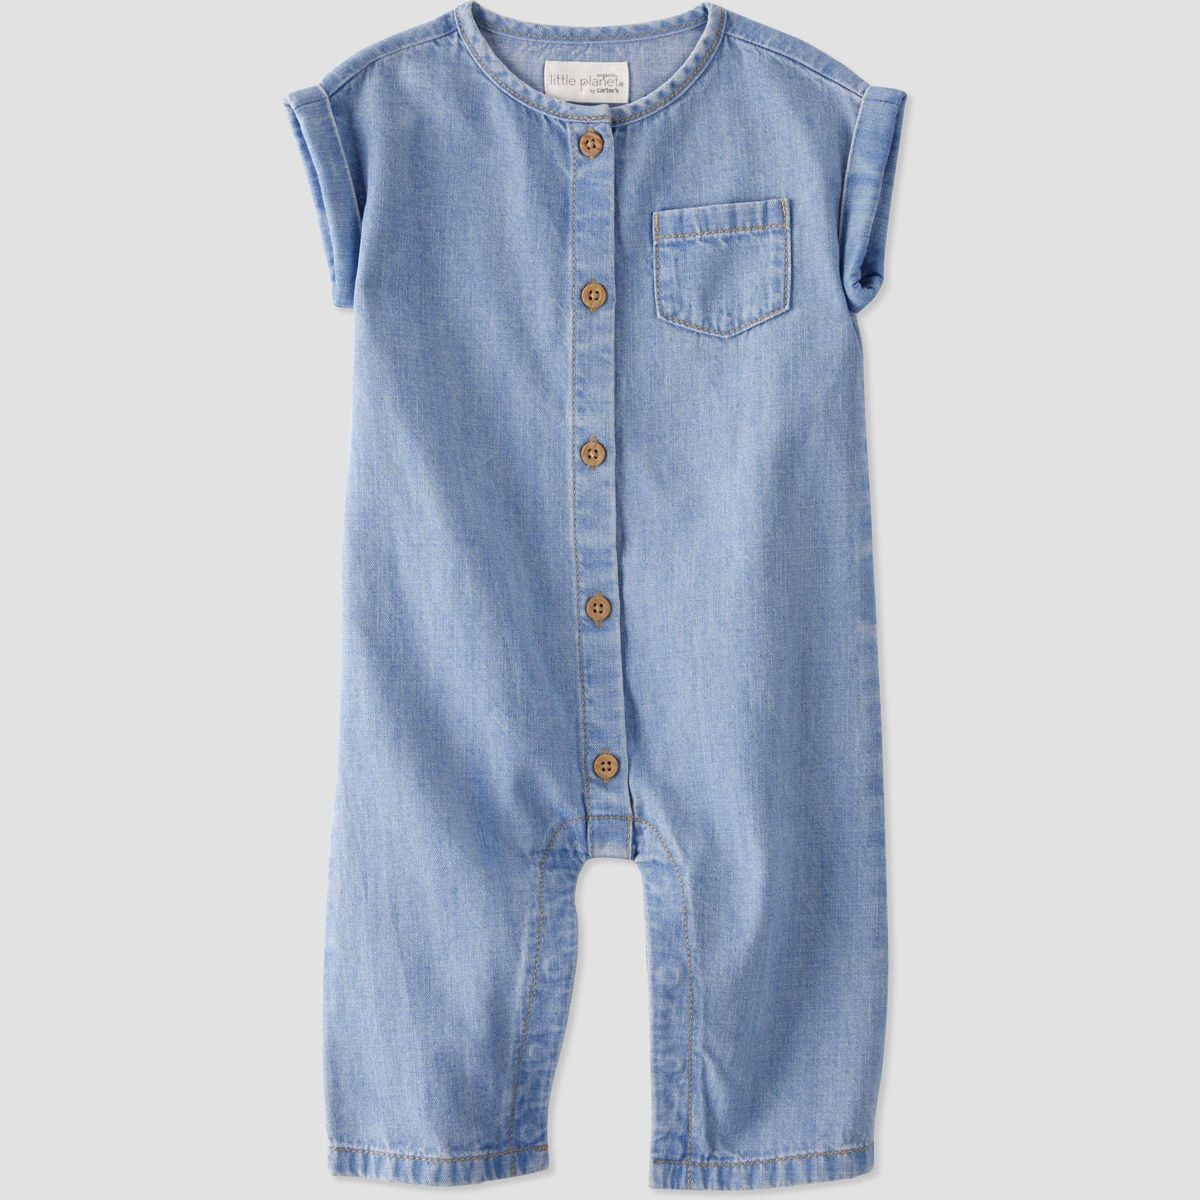 Little Planet by Carter’s Organic Baby Chambray Jumpsuit - 18M | Target